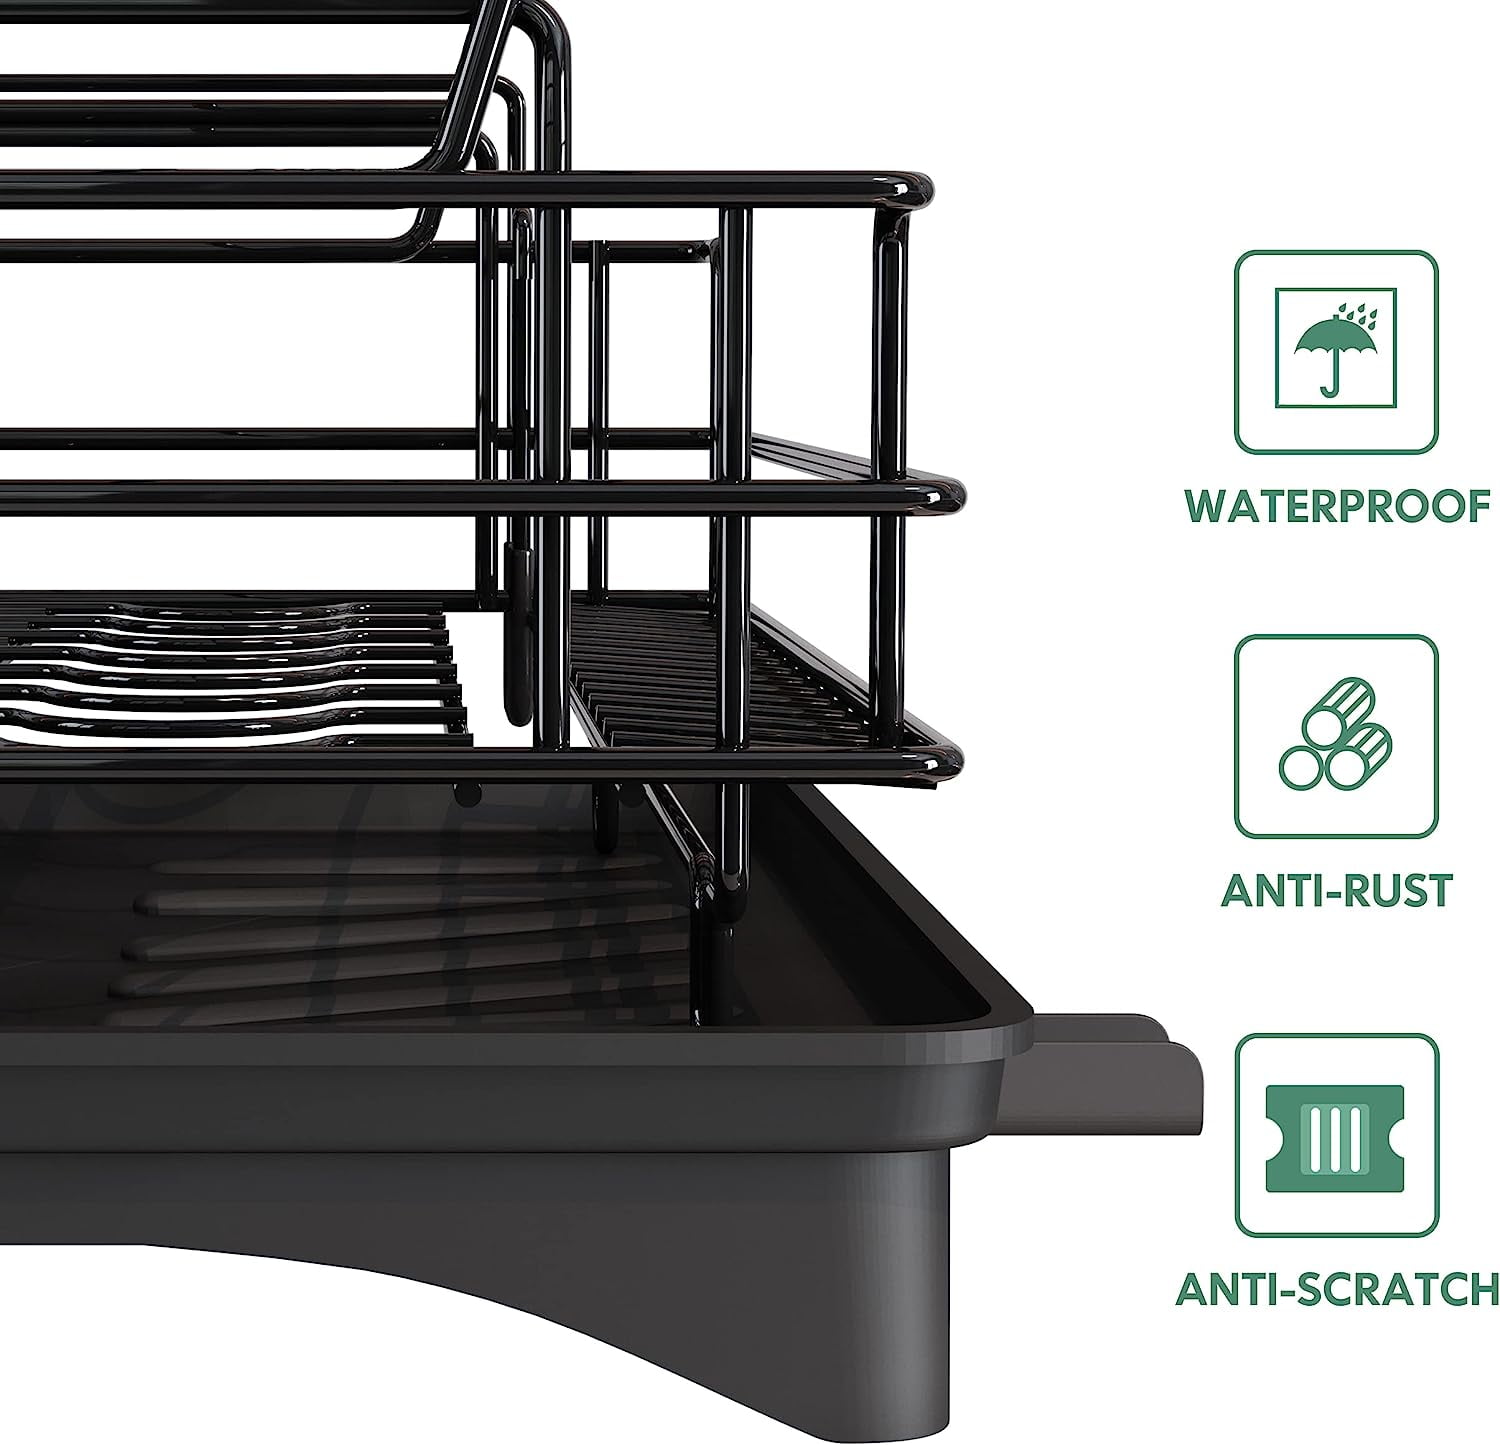  MOUKABAL Over The Sink Dish Drying Rack, Over Sink Dish Drying  Rack with 2 Tier Utensil Holder,Large Stainless Steel Dish Racks for Kitchen  Counter(fit≤33 Sink)